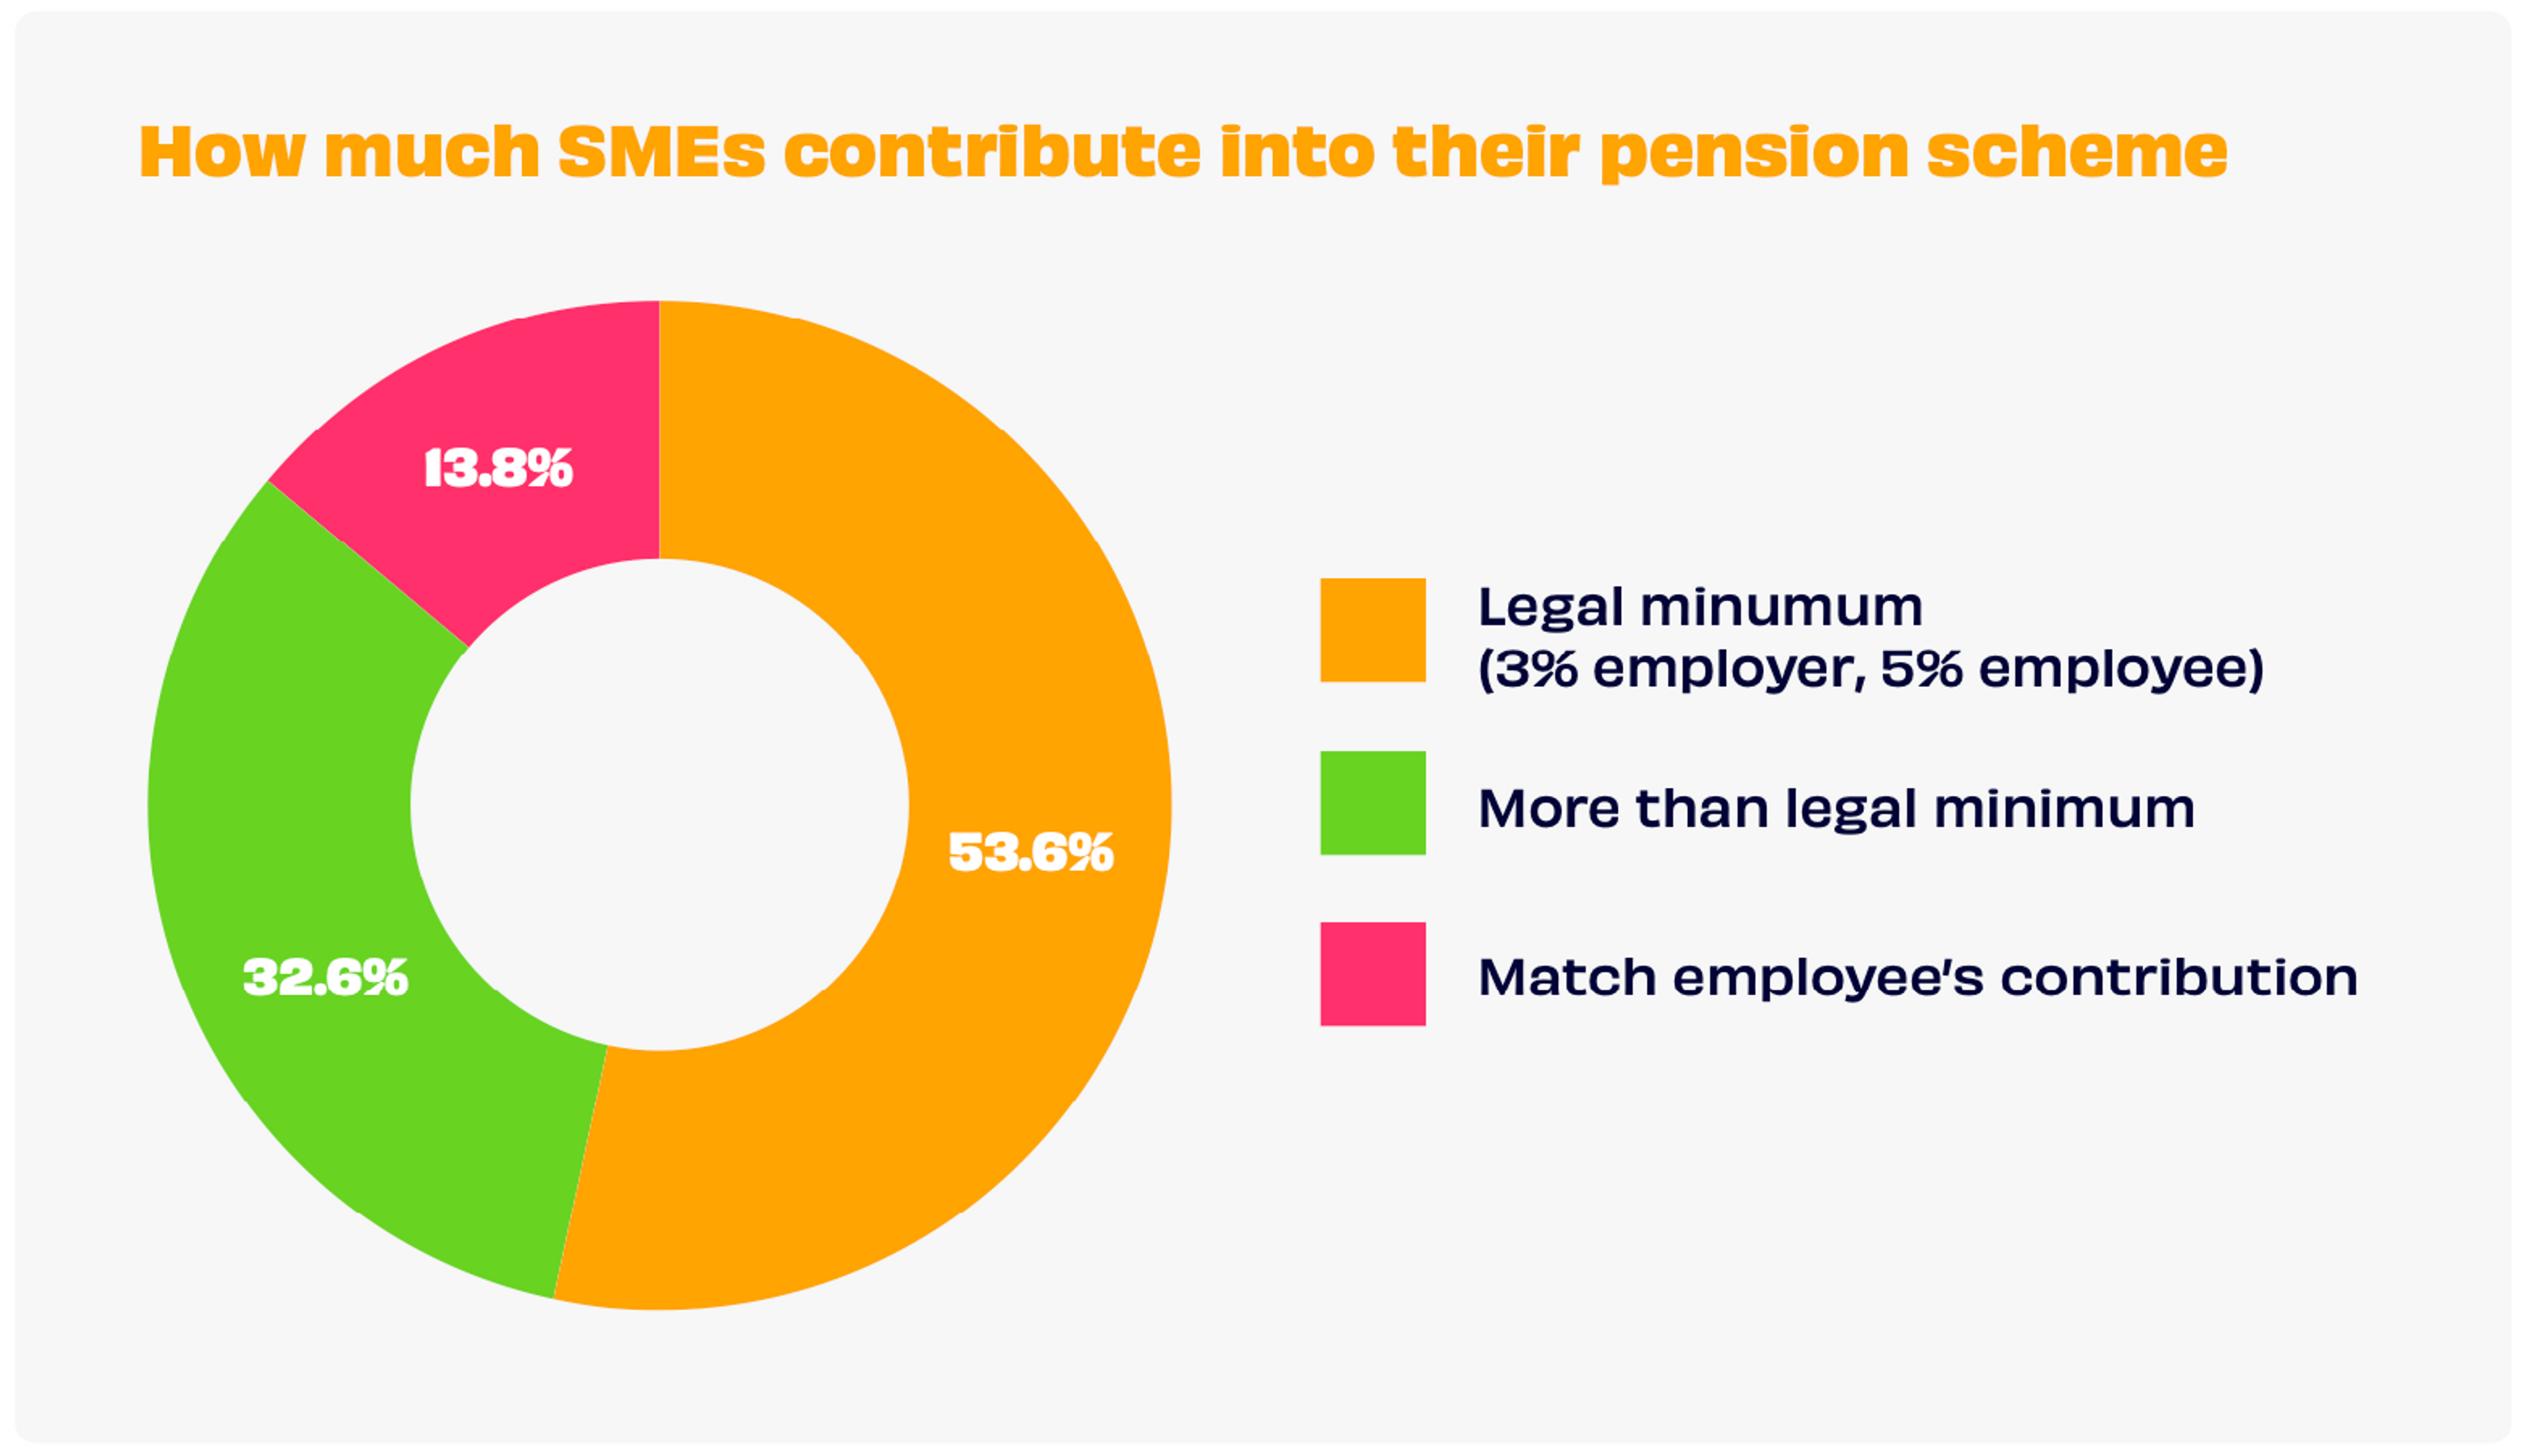 A pie chart showing how much SMEs contribute into their pension scheme